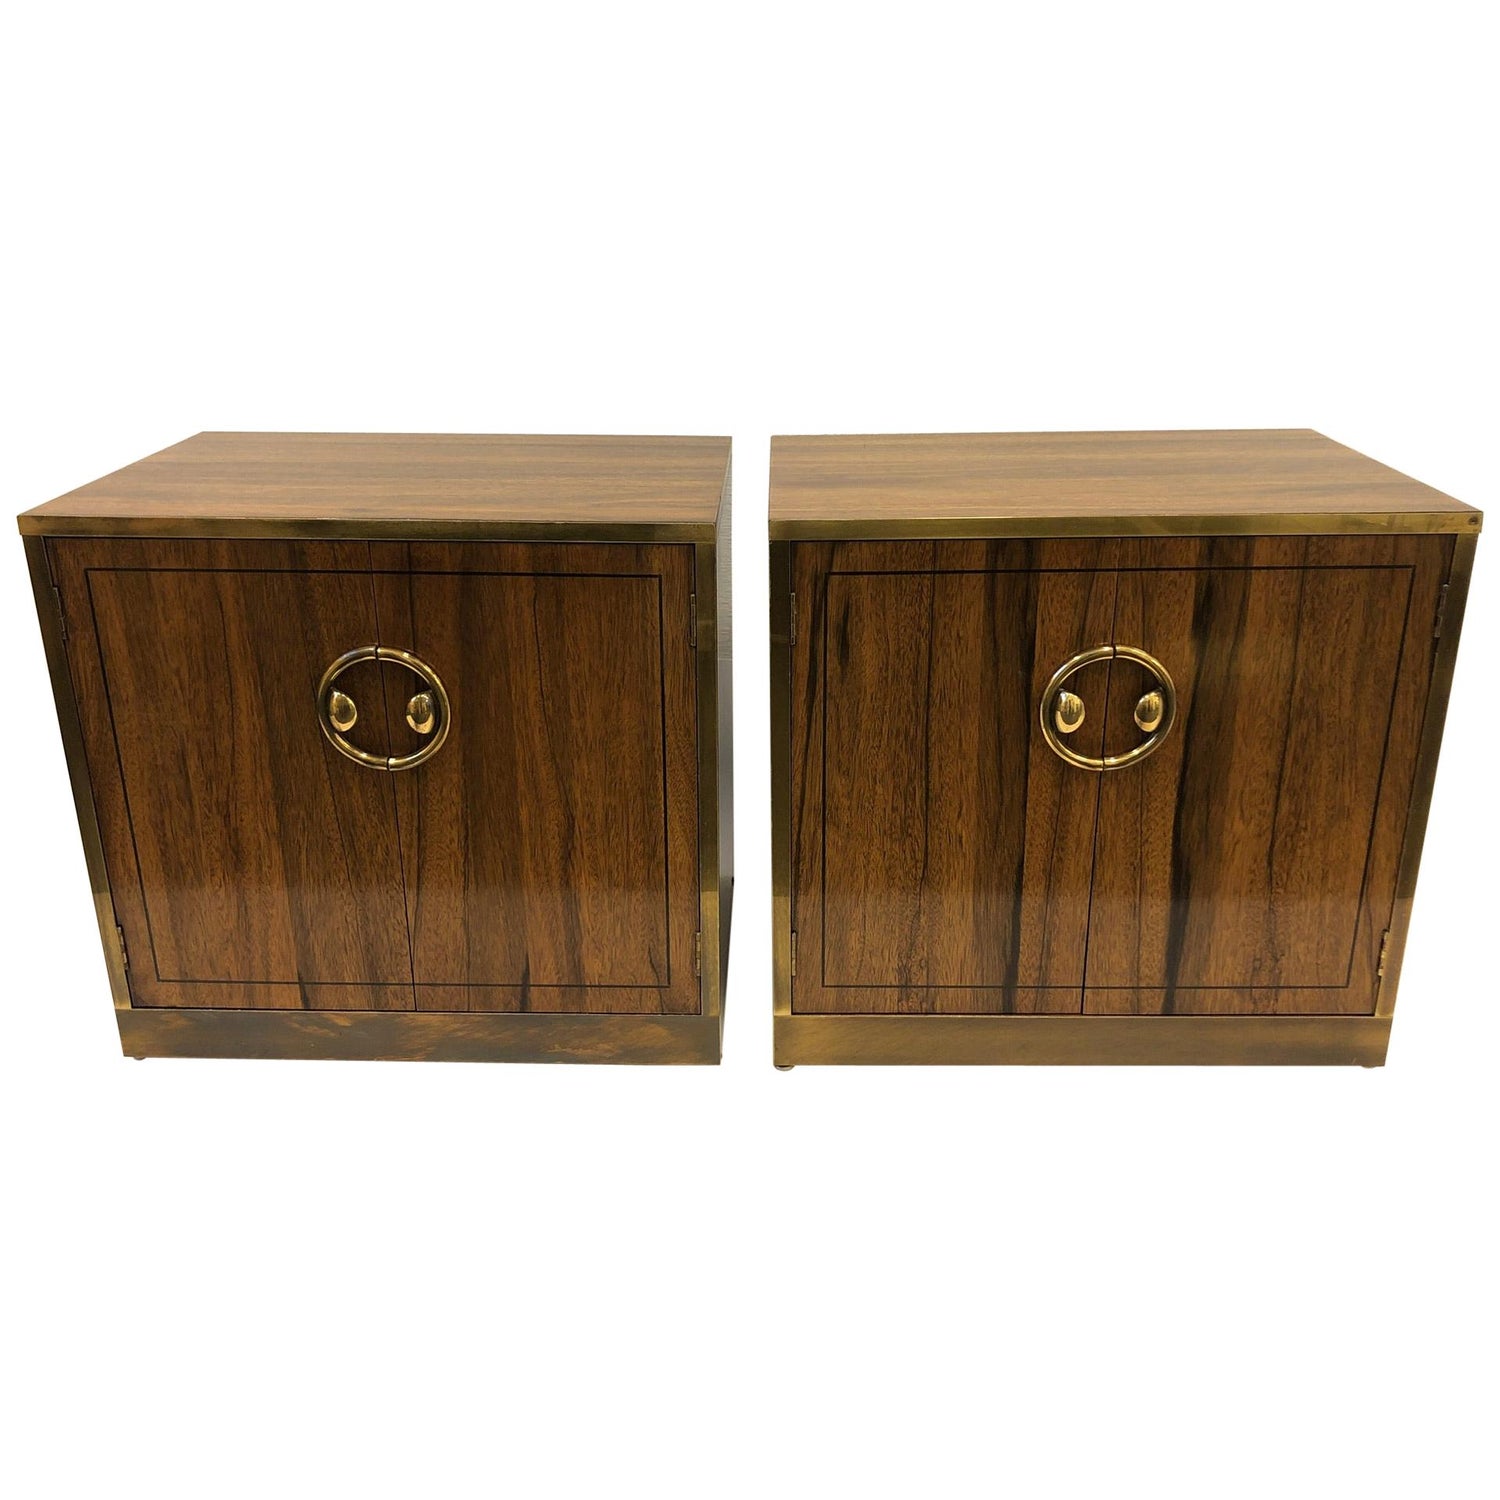 Pair Of Zebra Wood And Brass Nightstands By Mastercraft For Sale